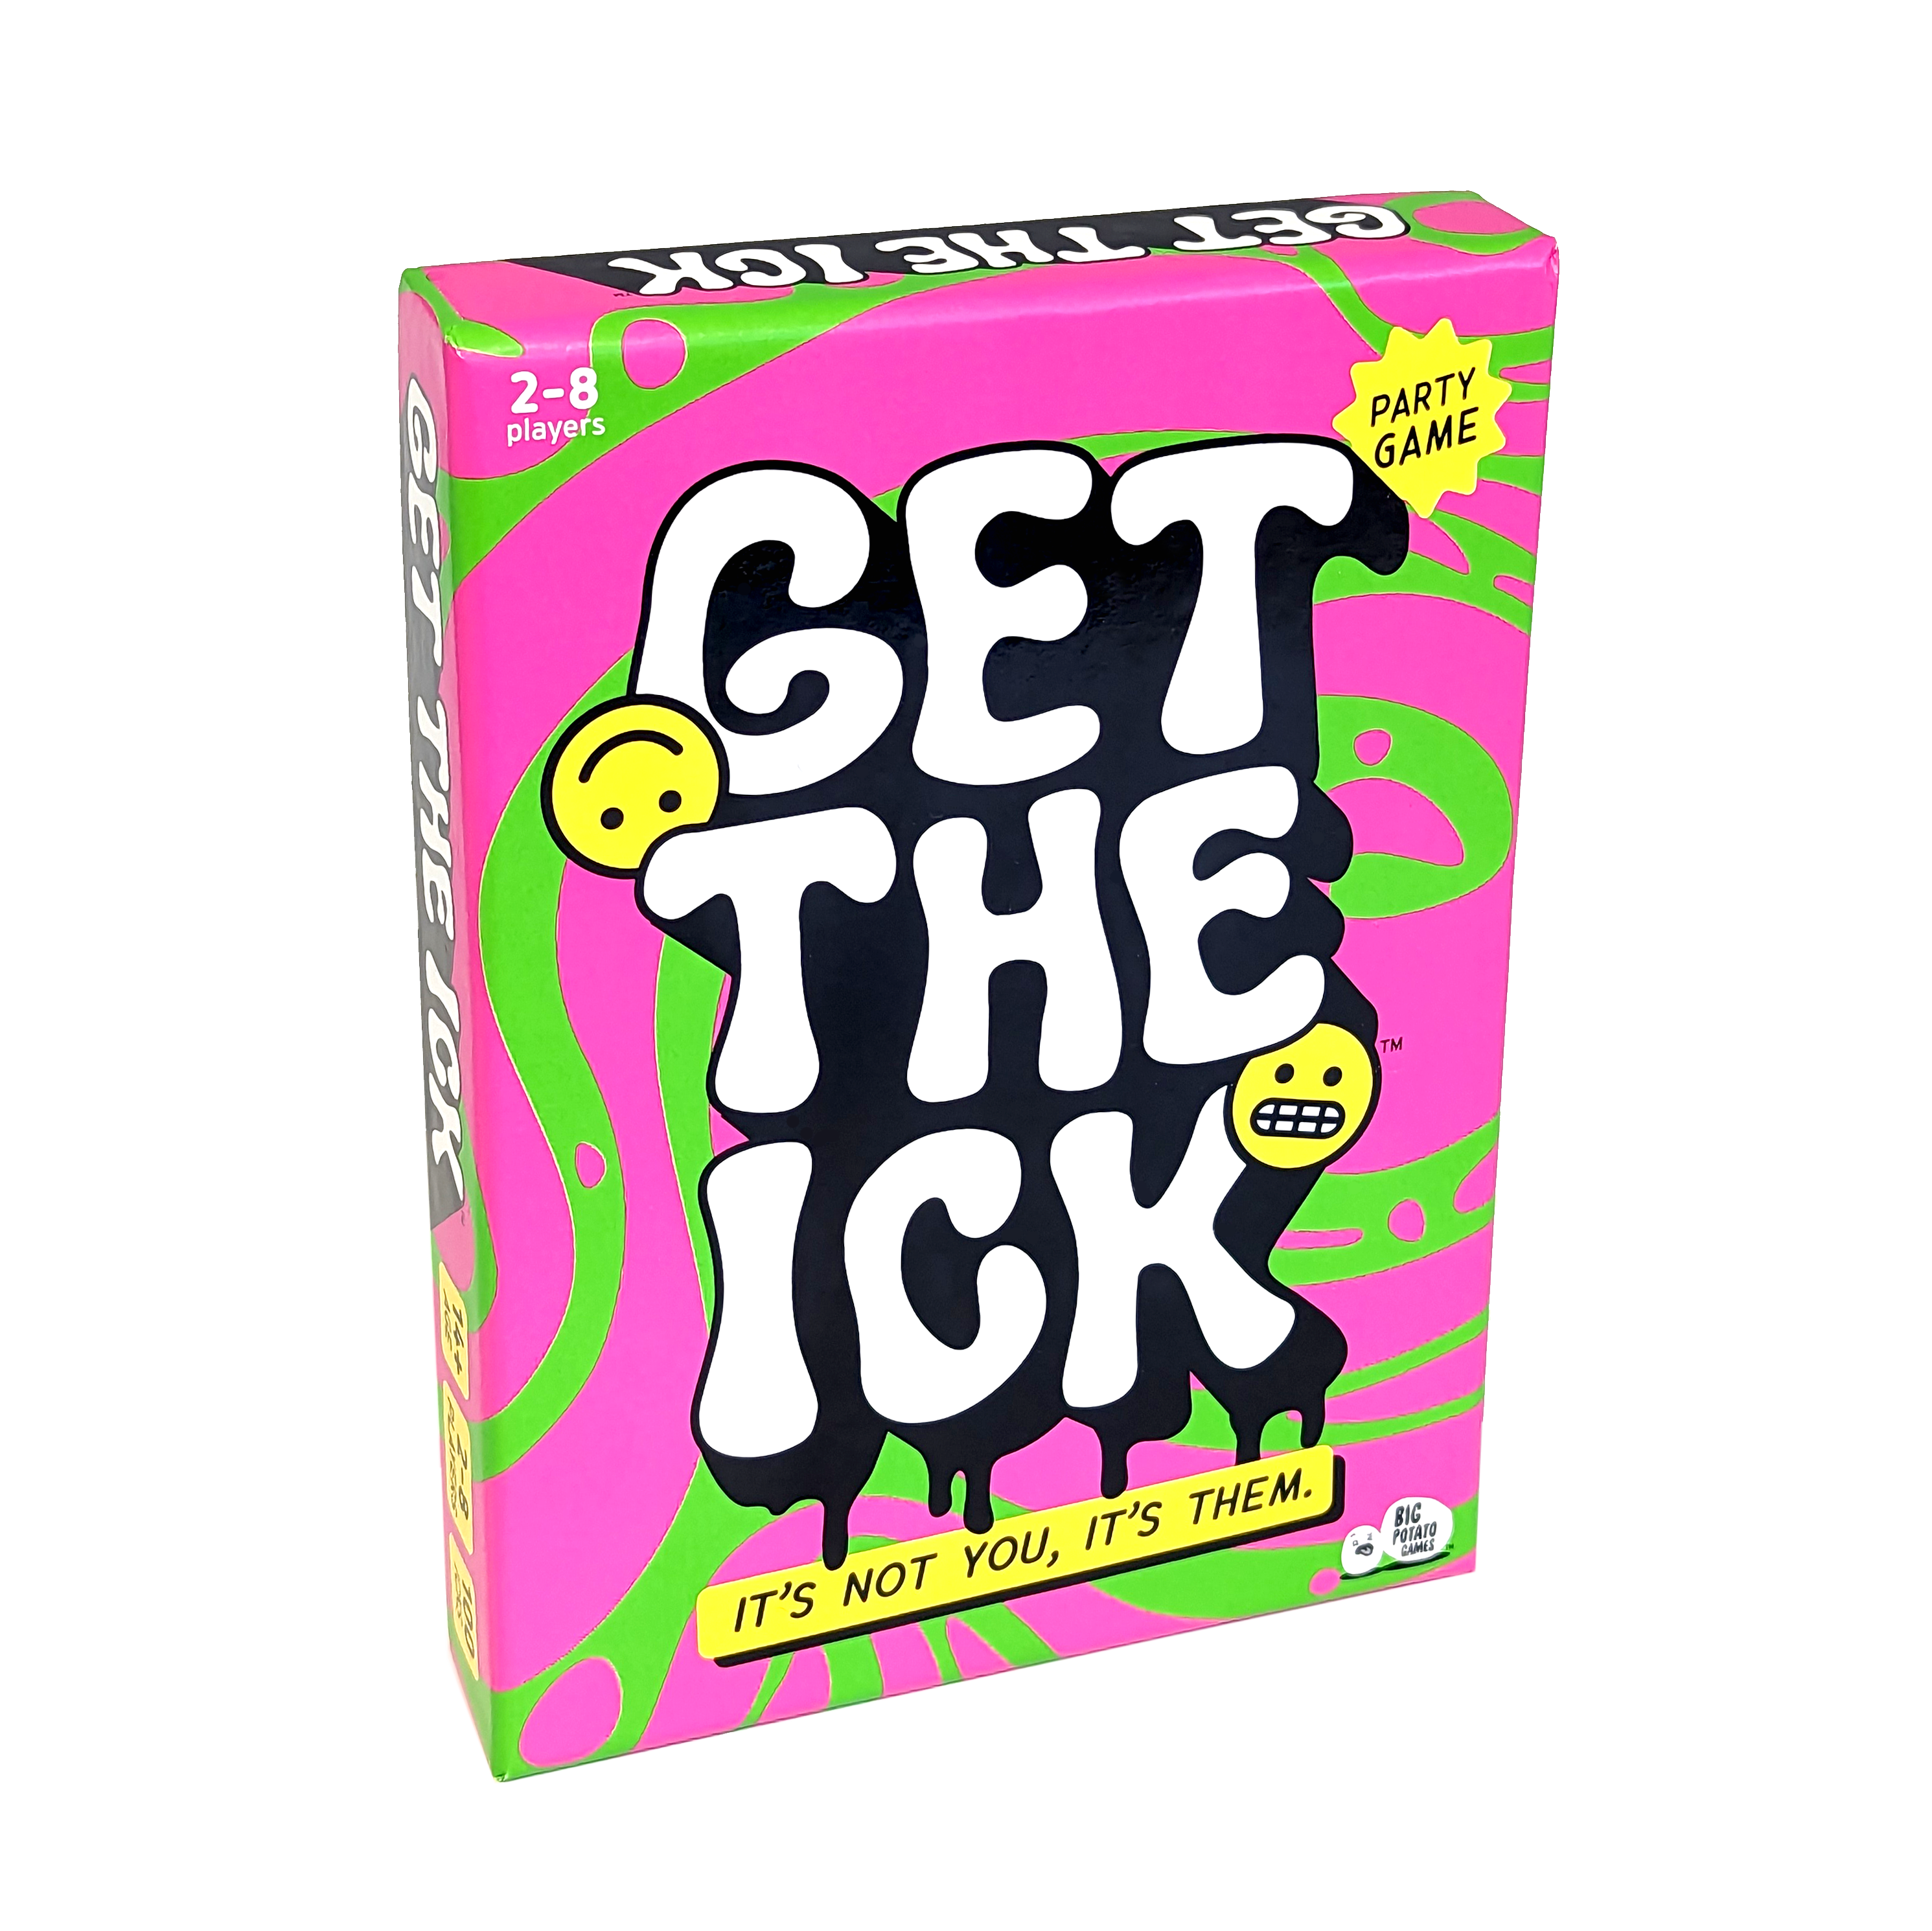 Get the Ick game box